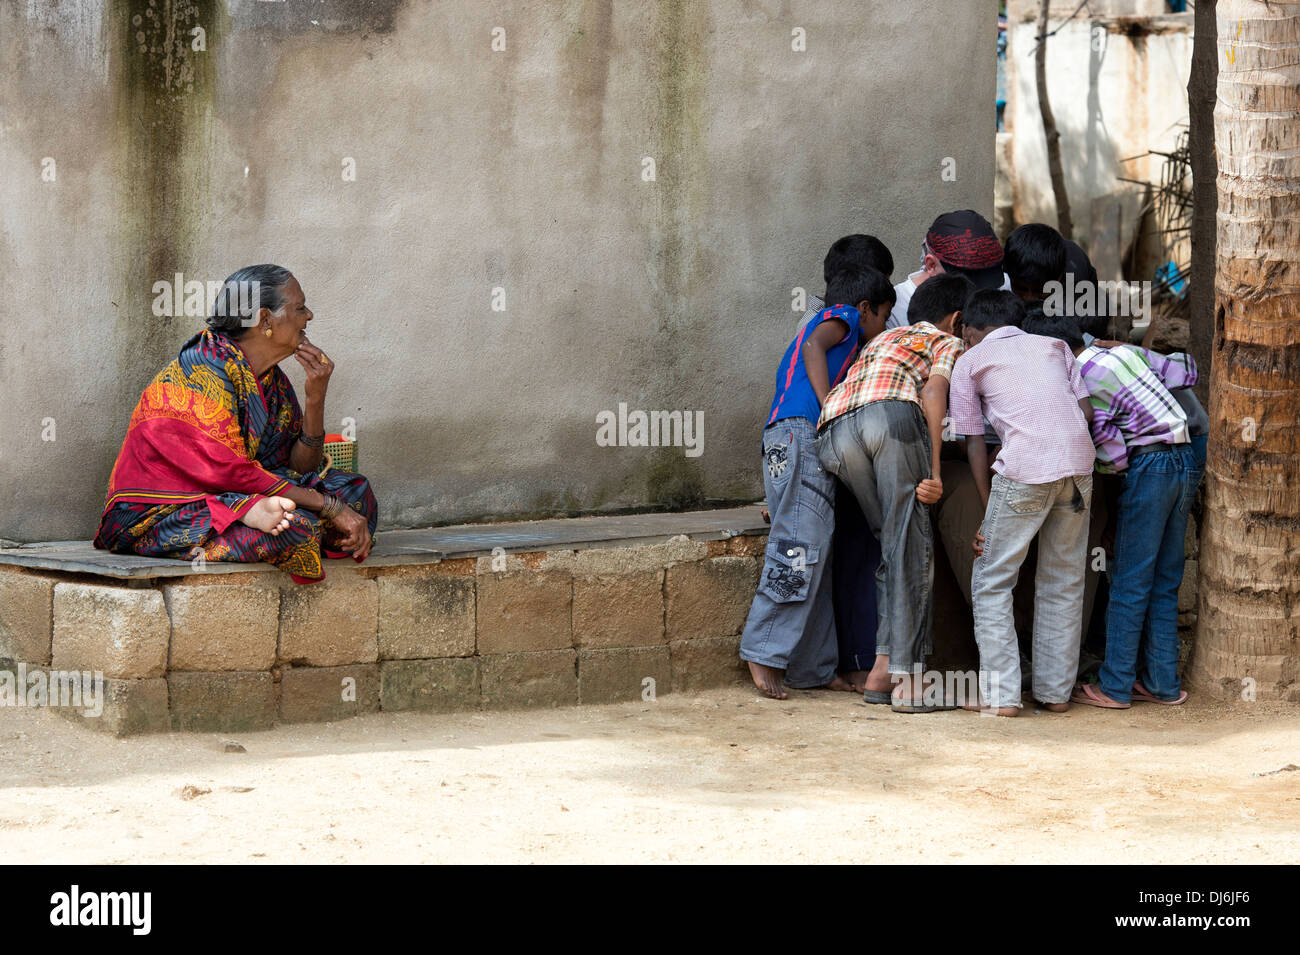 Rural indian boys huddled over a tourists camera watched by an old indian woman.   Andhra Pradesh, India Stock Photo